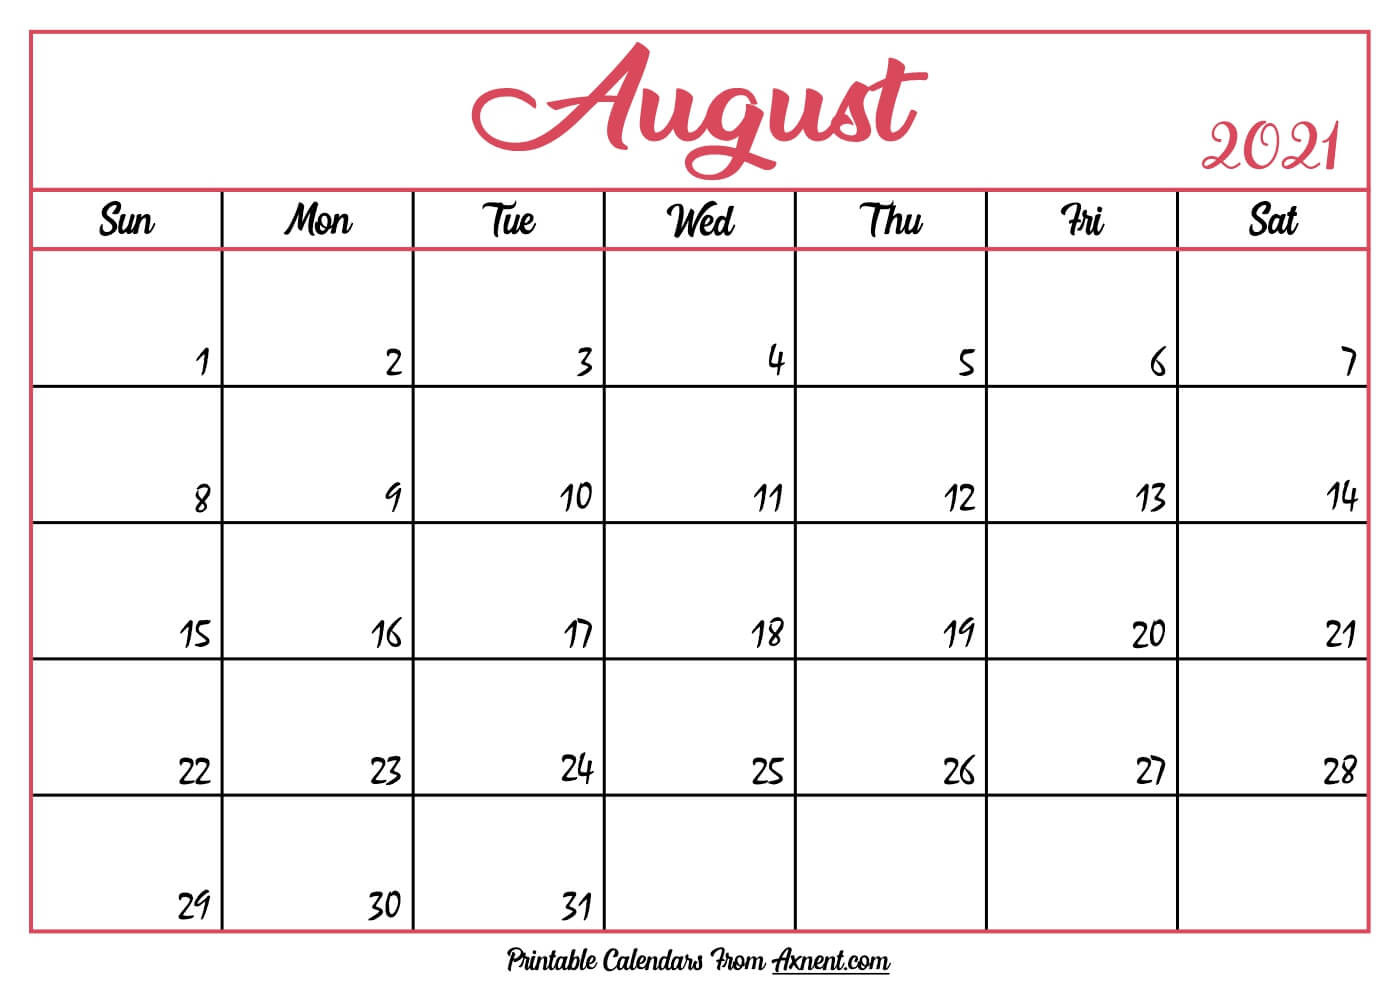 Printable August 2021 Calendar Template - Print Now-Appointment Calendar For Month Of August 2021